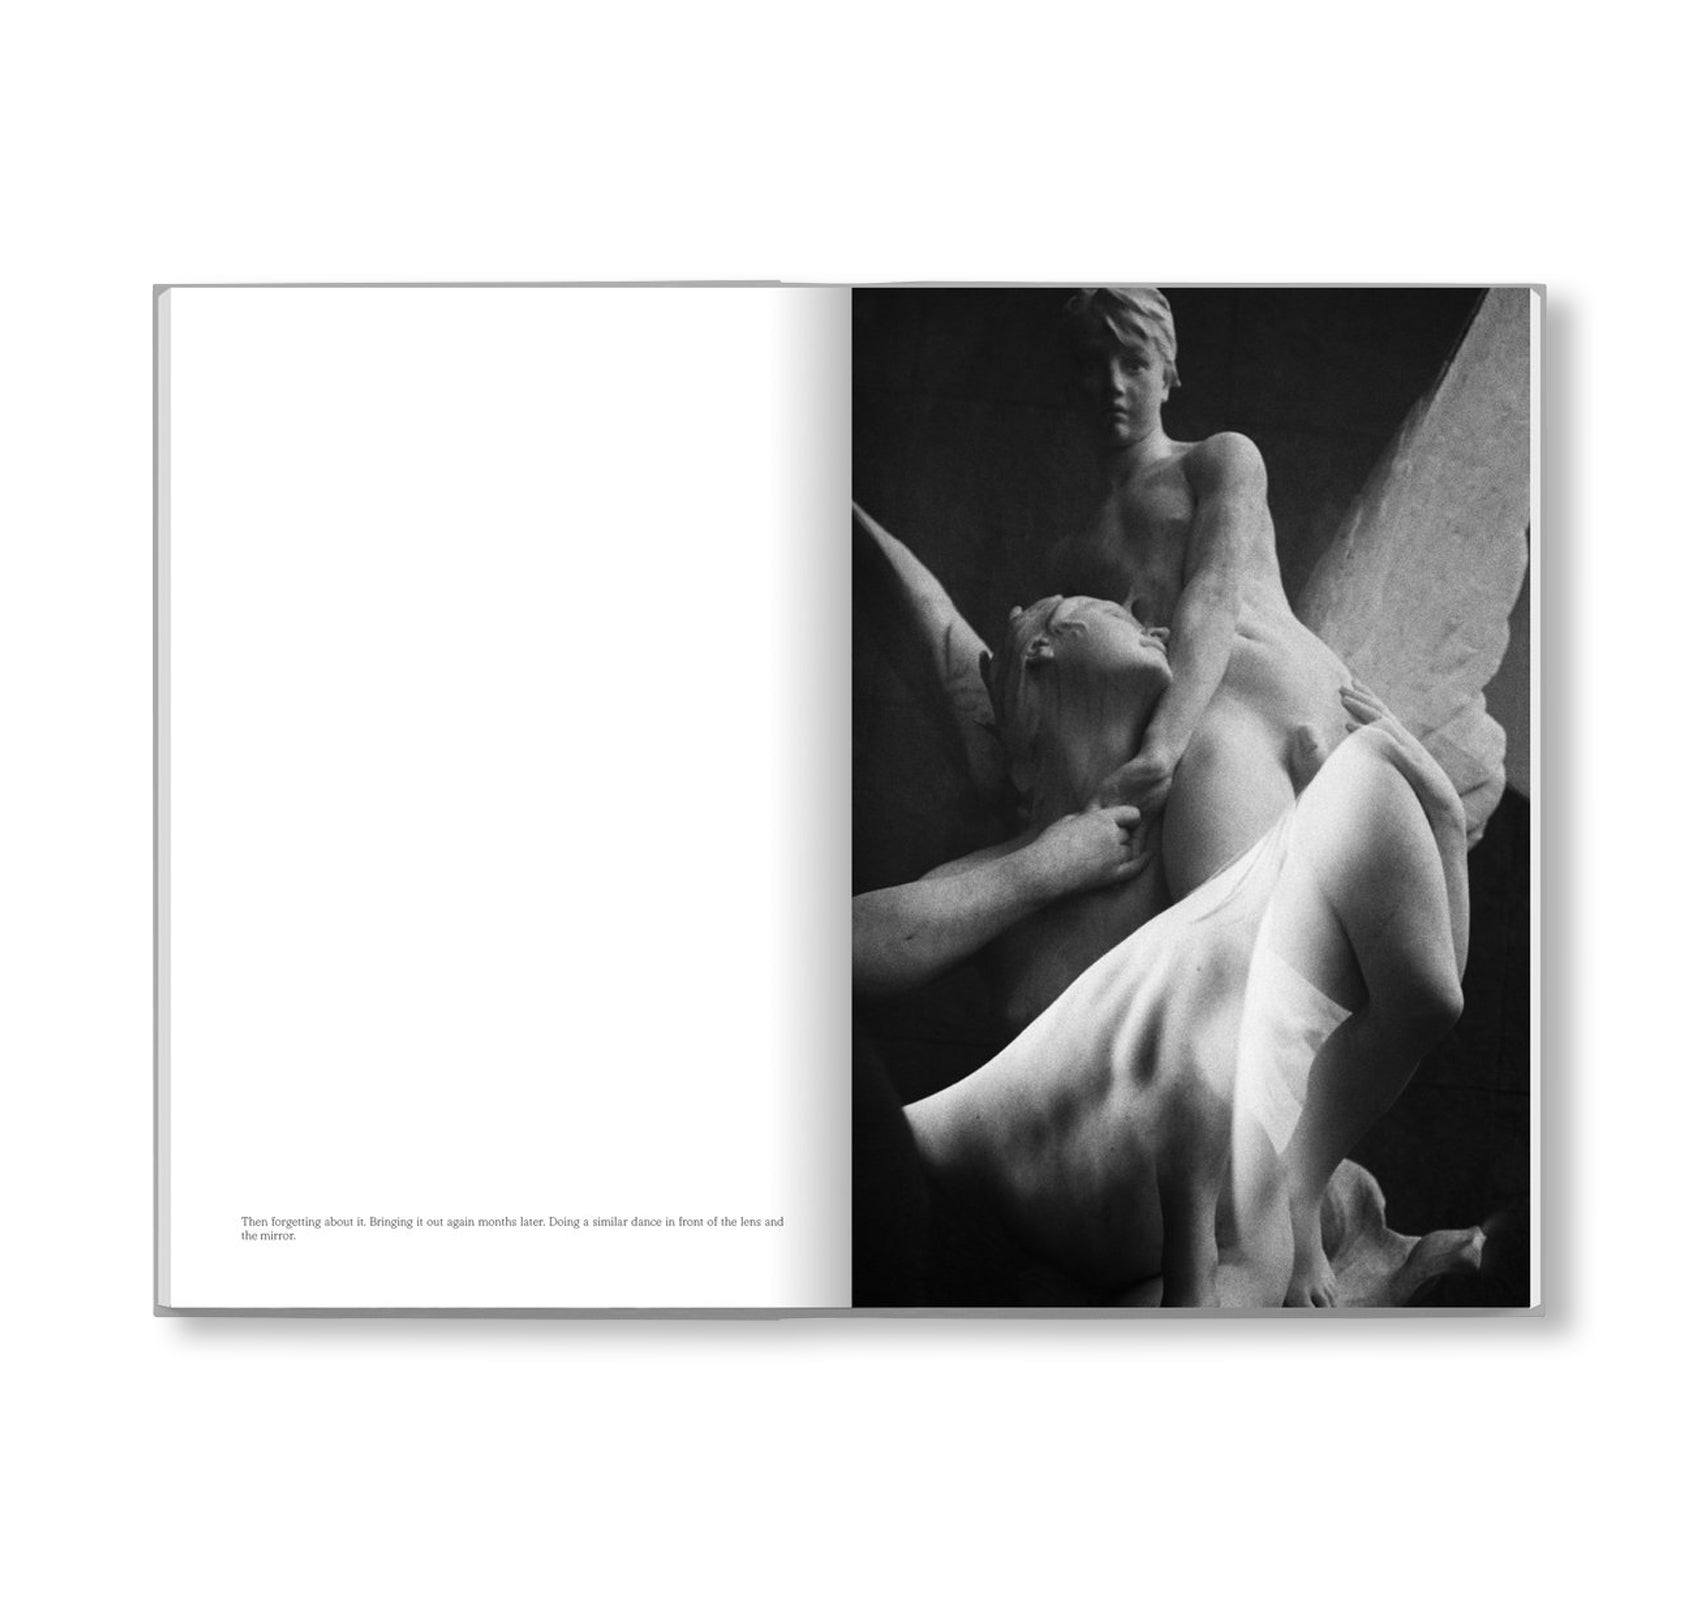 TOUCHING by Lina Scheynius [SPECIAL EDITION]